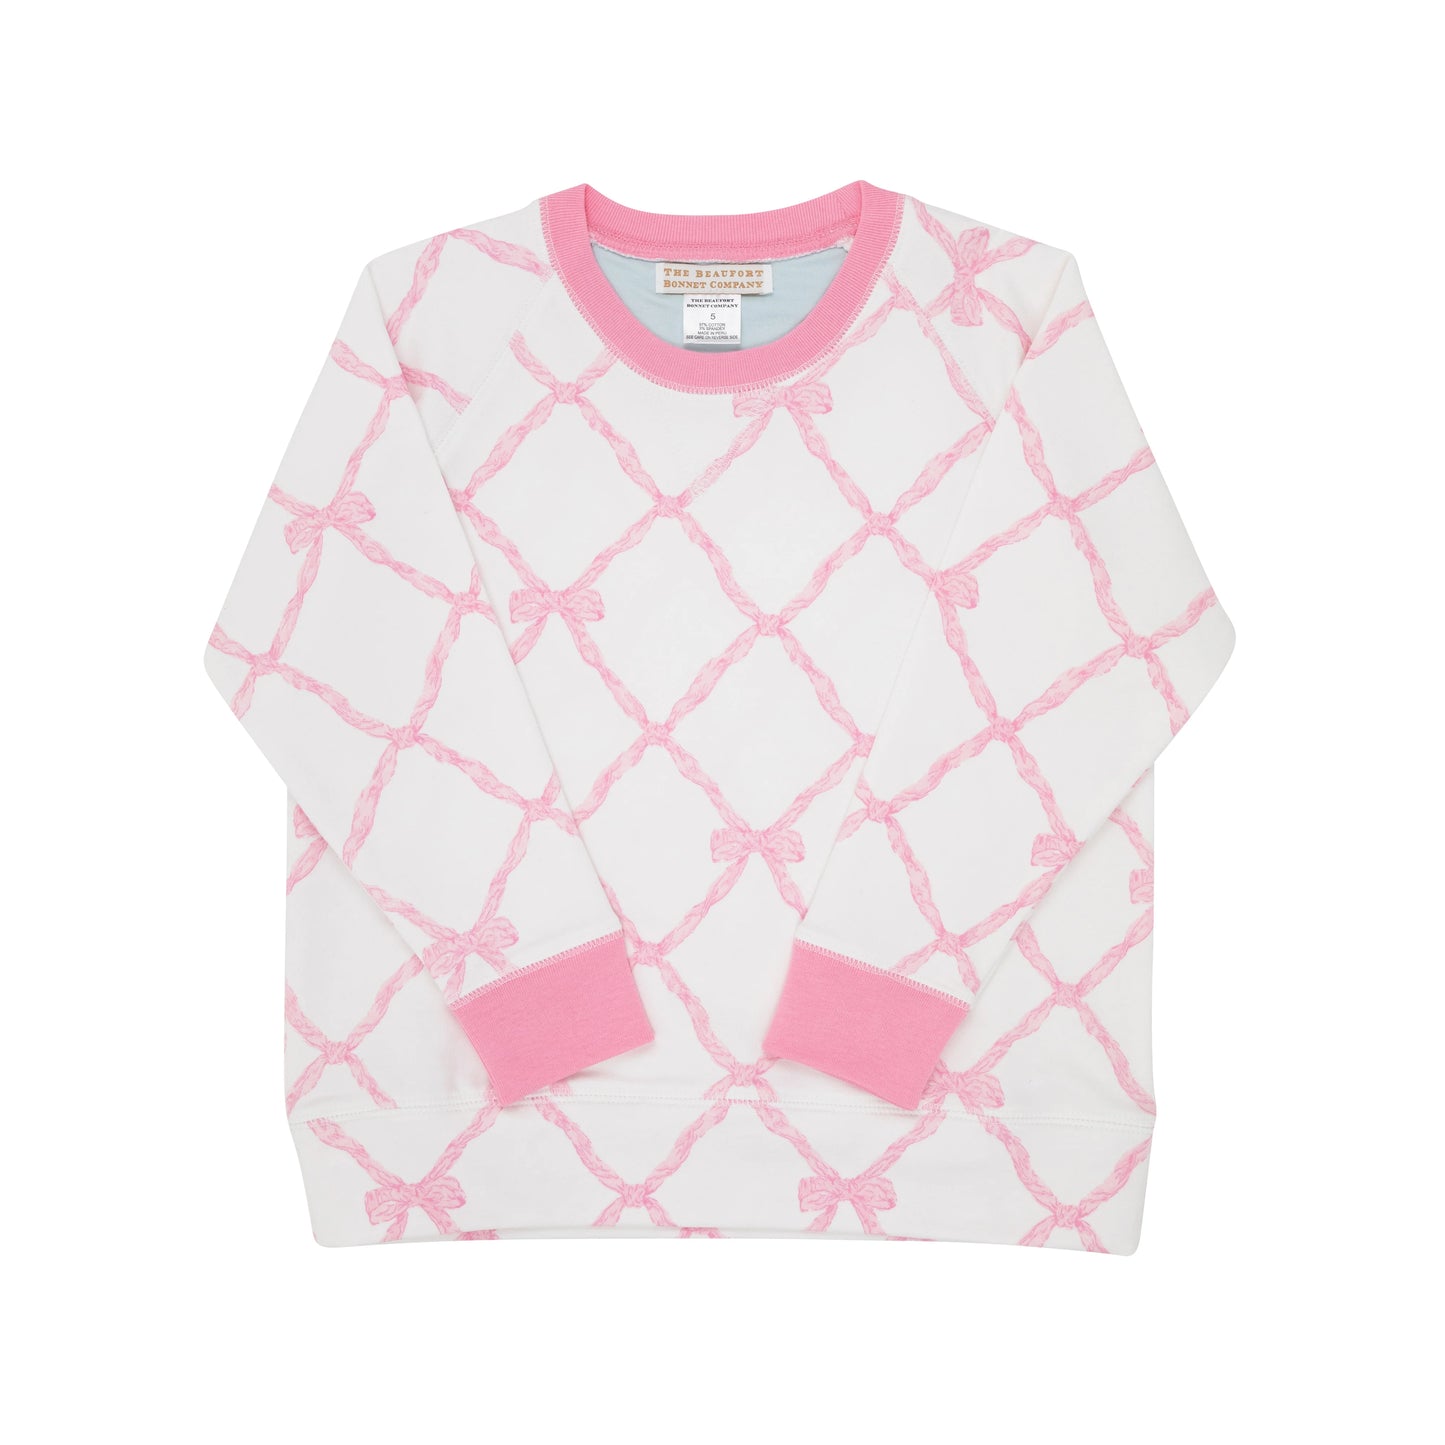 Cassidy Comfort Crewneck Girl - Belle Meade Bow with Hamptons Hot Pink